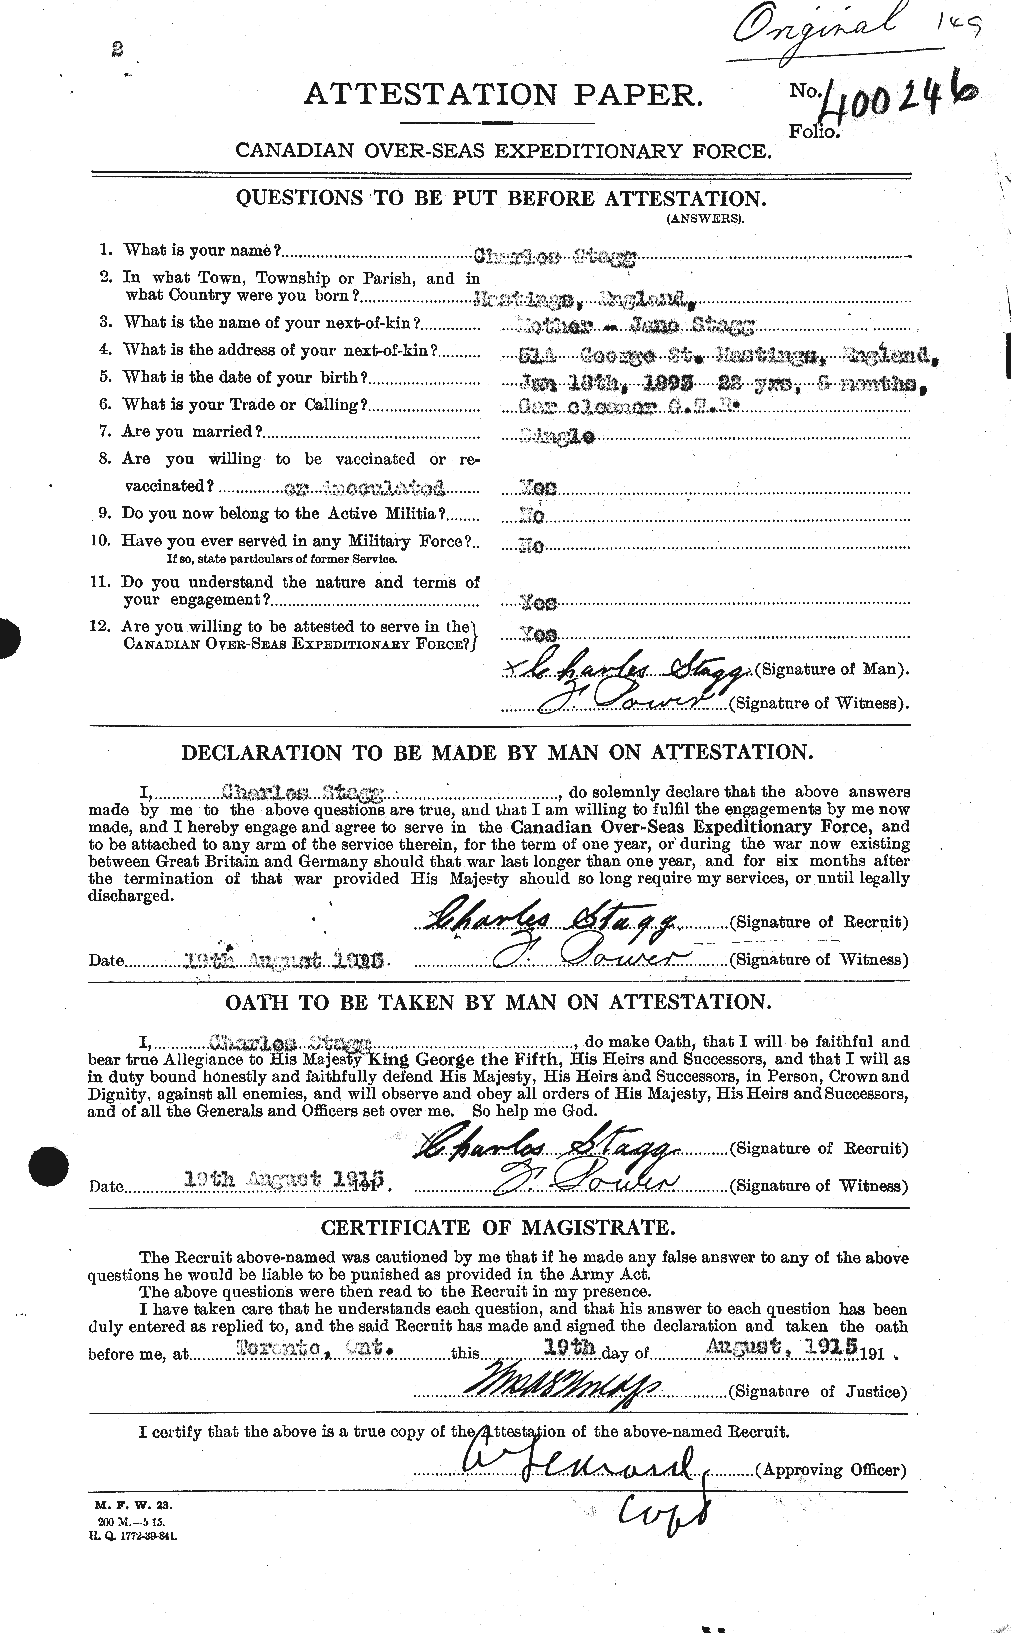 Personnel Records of the First World War - CEF 117397a